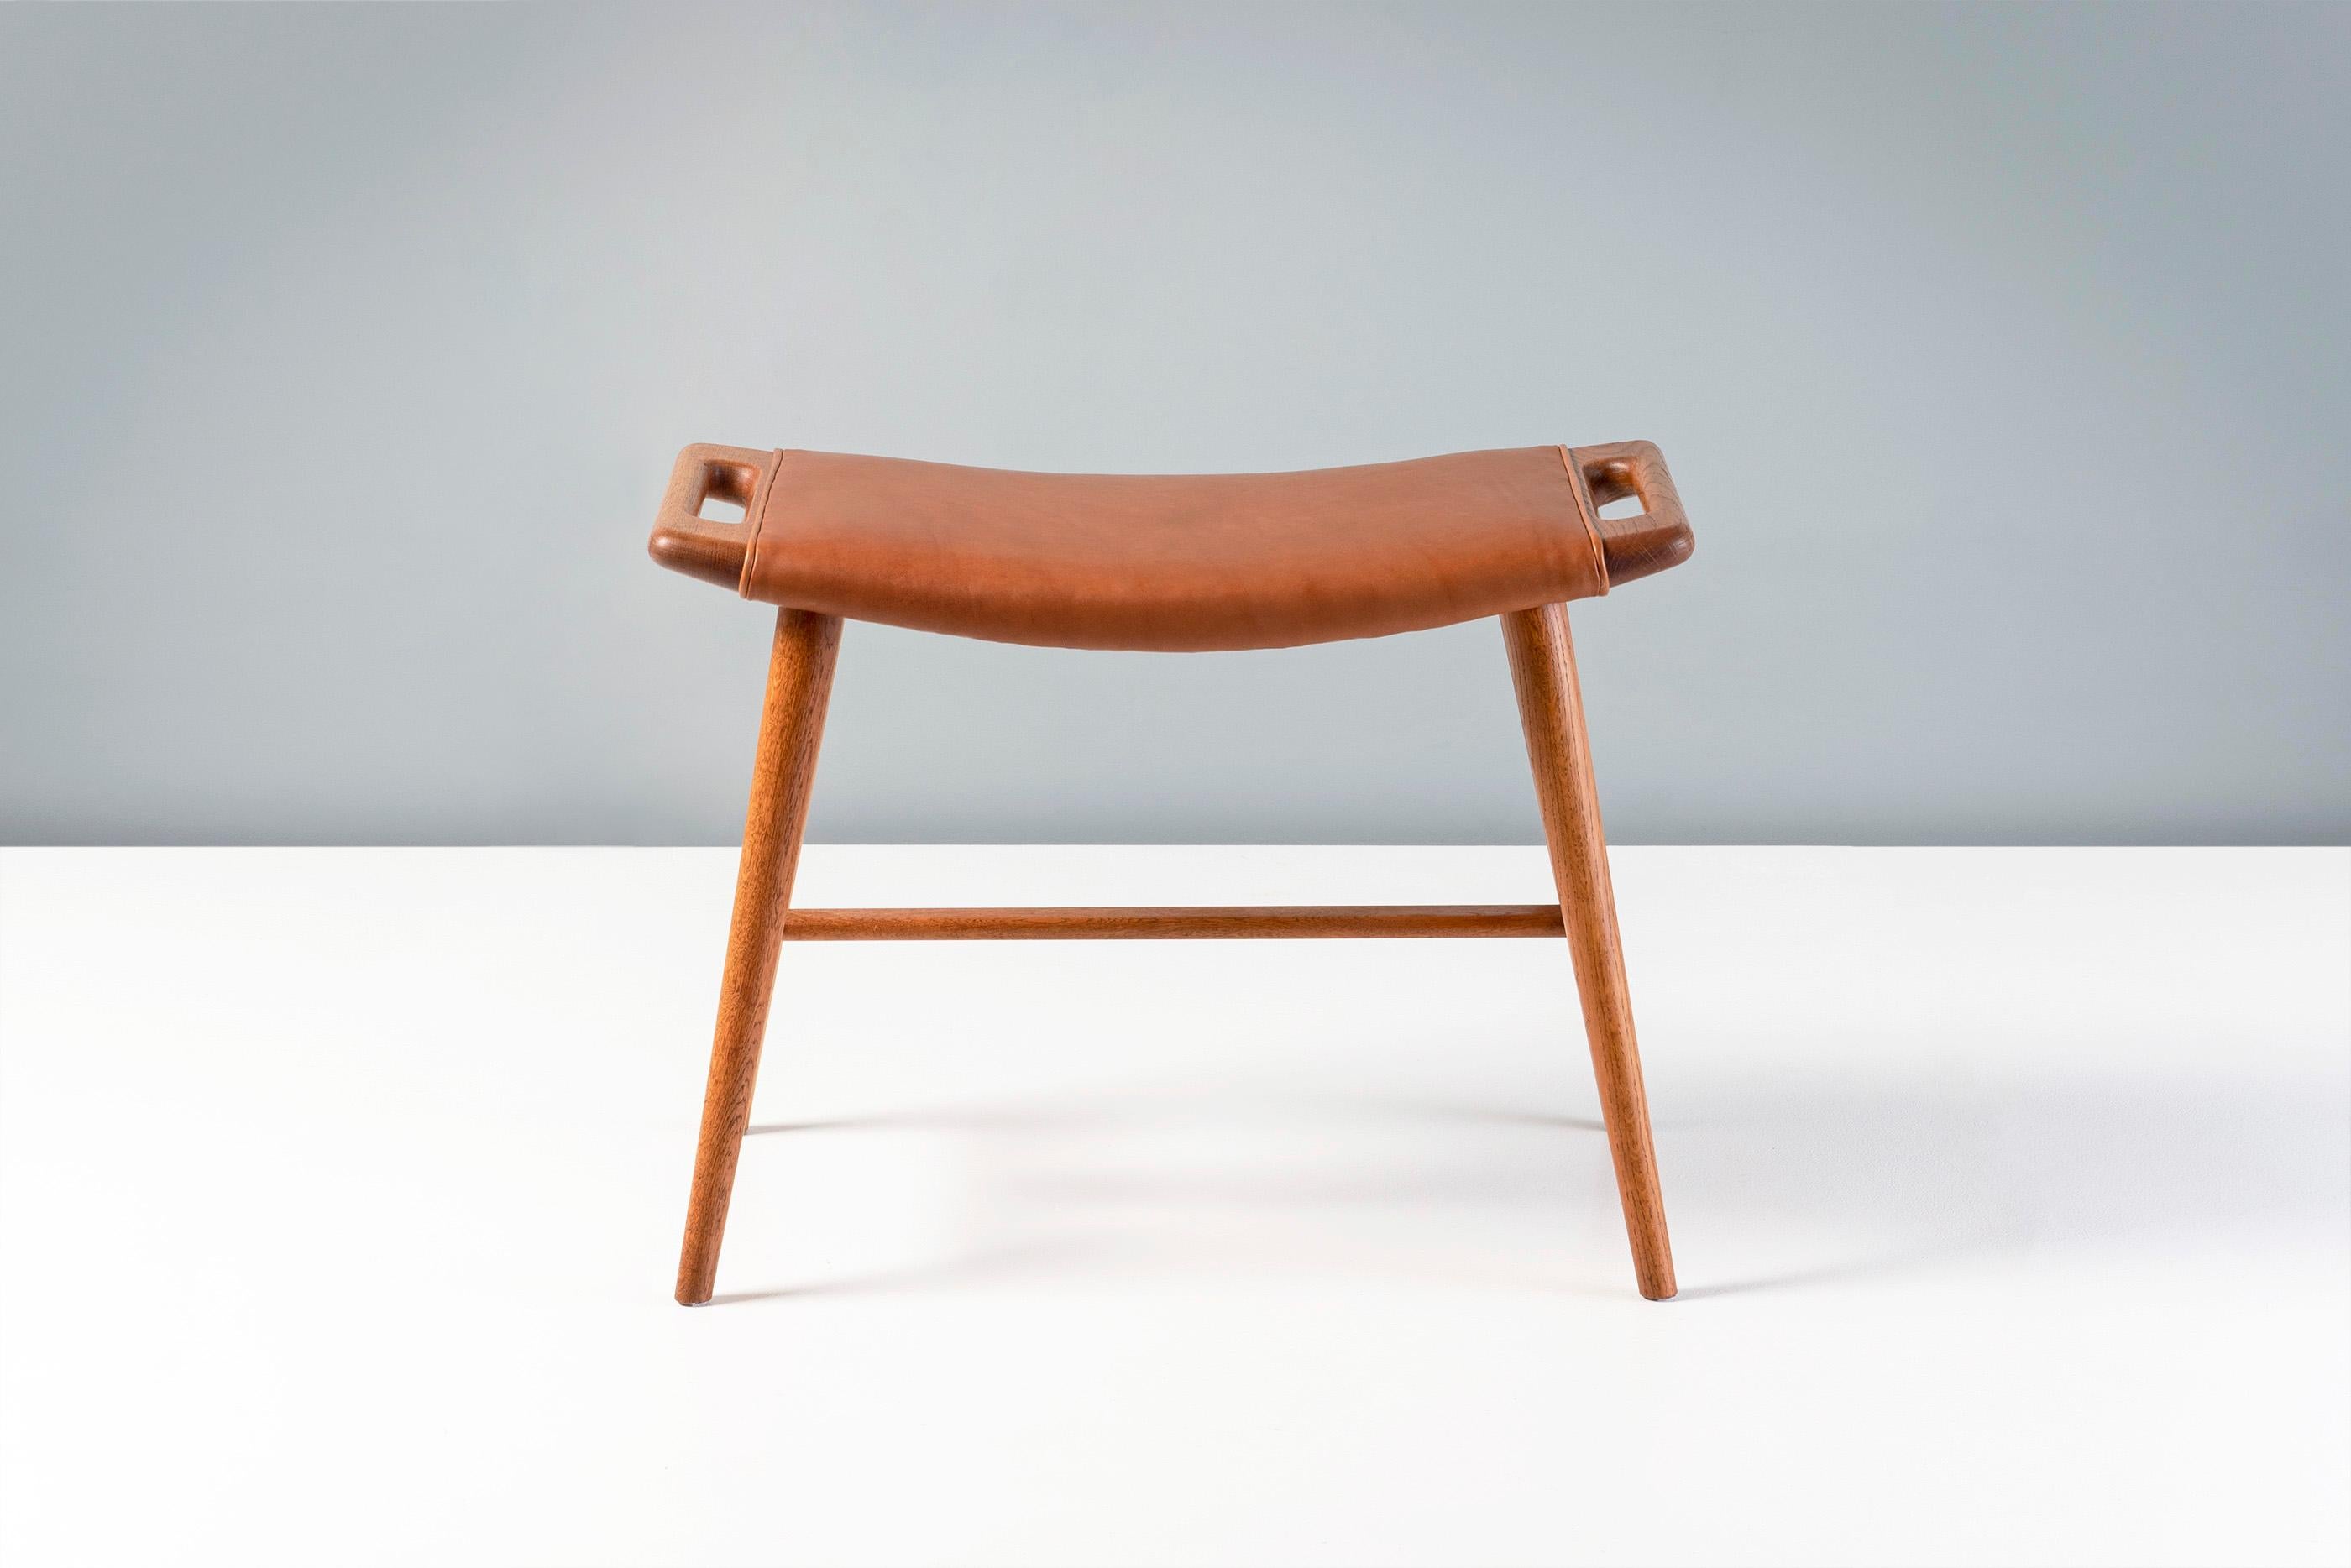 Hans Wegner - AP-30 Piano Stool, 1957

Produced by A.P. Stolen in Denmark, this model was an evolution of the AP-29 Papa Bear ottoman. The rarely seen piano stool has an additional cross-bar and longer legs creating a taller overall height. This